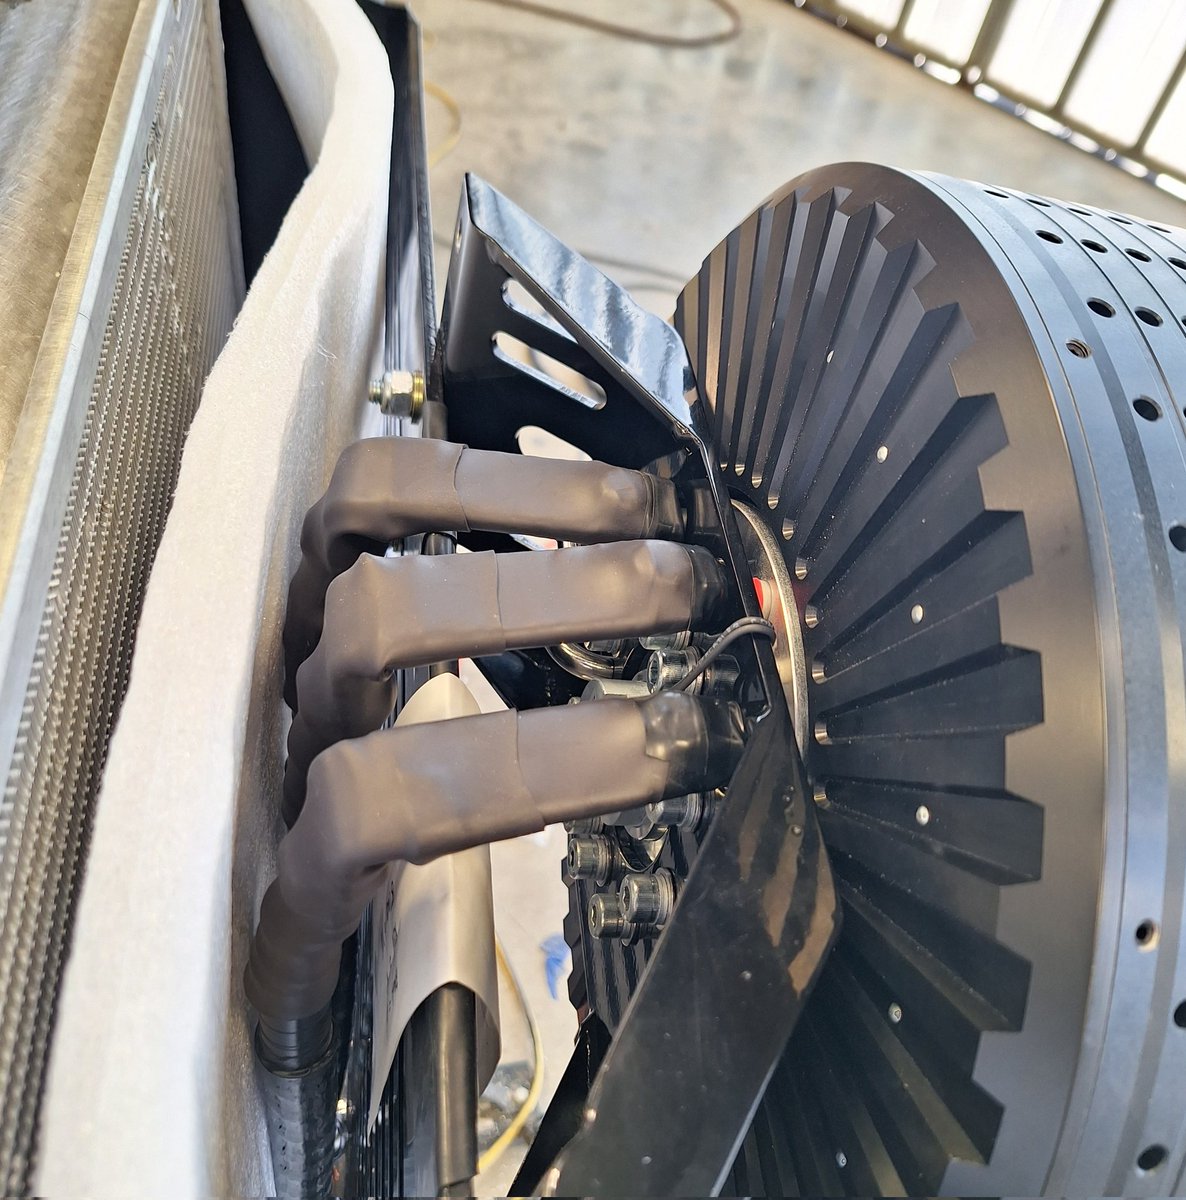 Ohms law, higher voltage lets you run at lower current for the same power. Check out our #ProtiumAircraft electric motor install! #ElectricVehicles #Hydrogenfuelcells